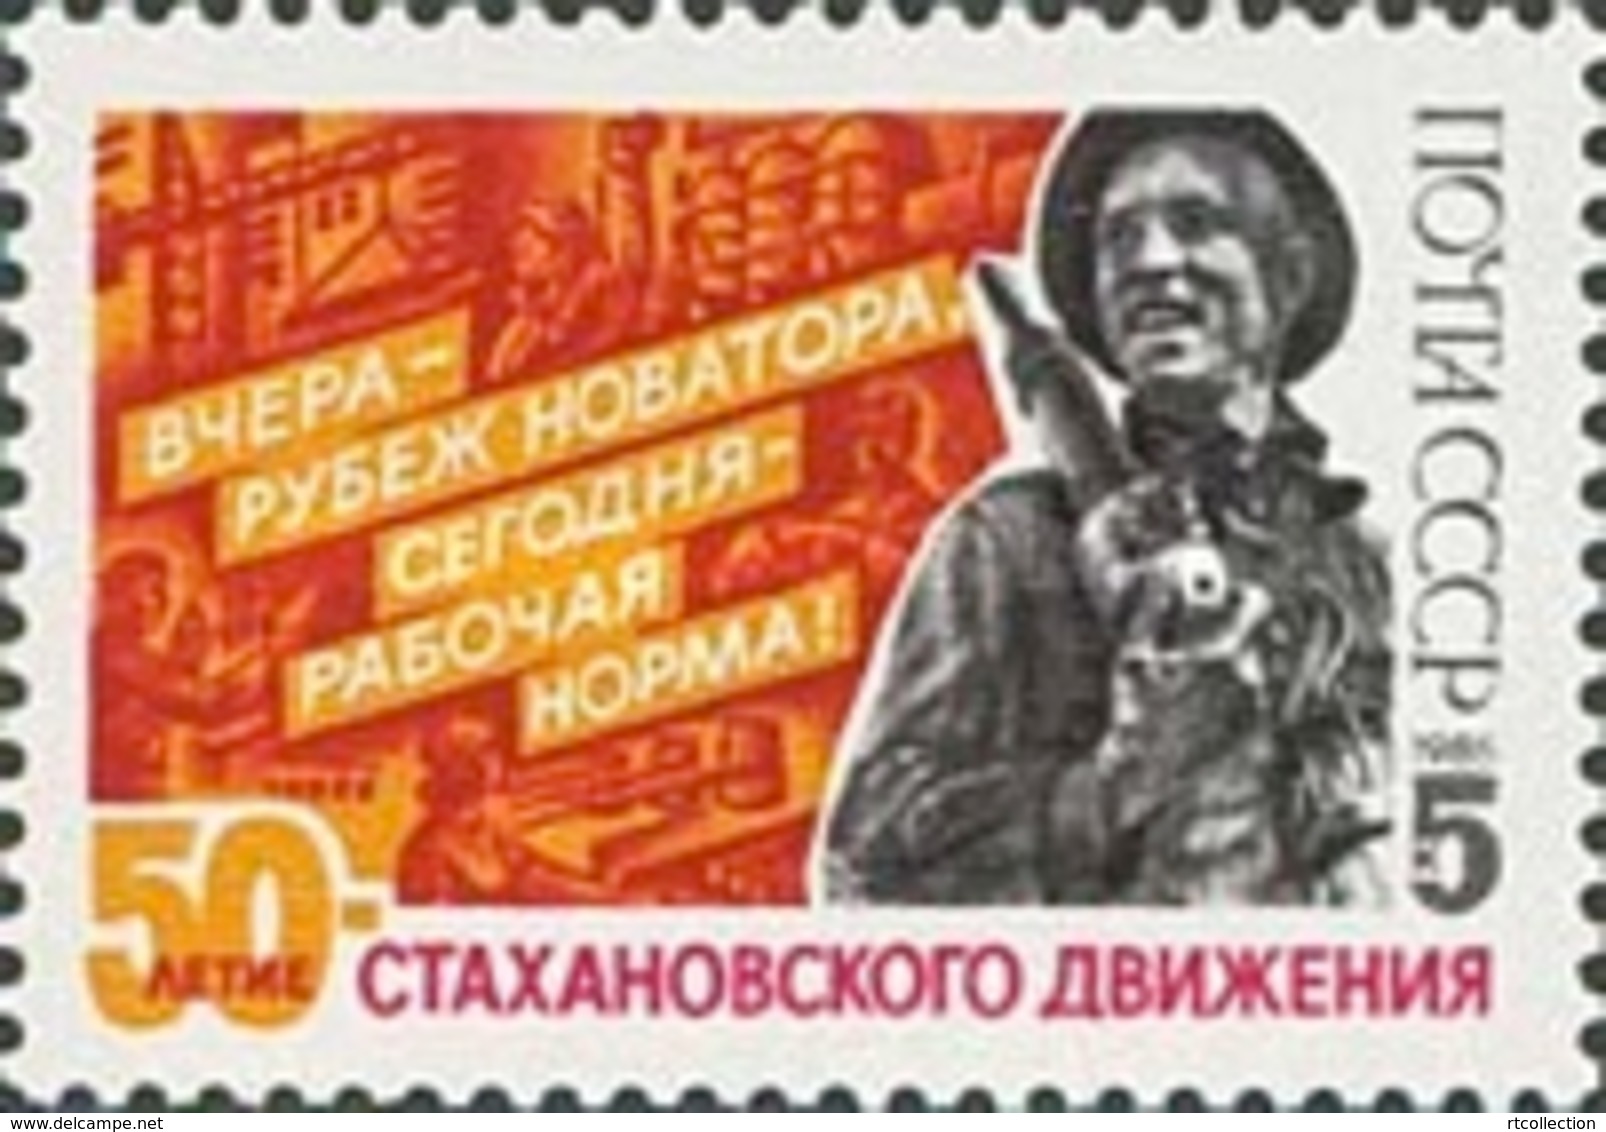 USSR Russia 1985 Stakhanovite Movement For High Labor Productivity 50th Anniv History Celebrations Stamp MNH Michel 5543 - Unused Stamps